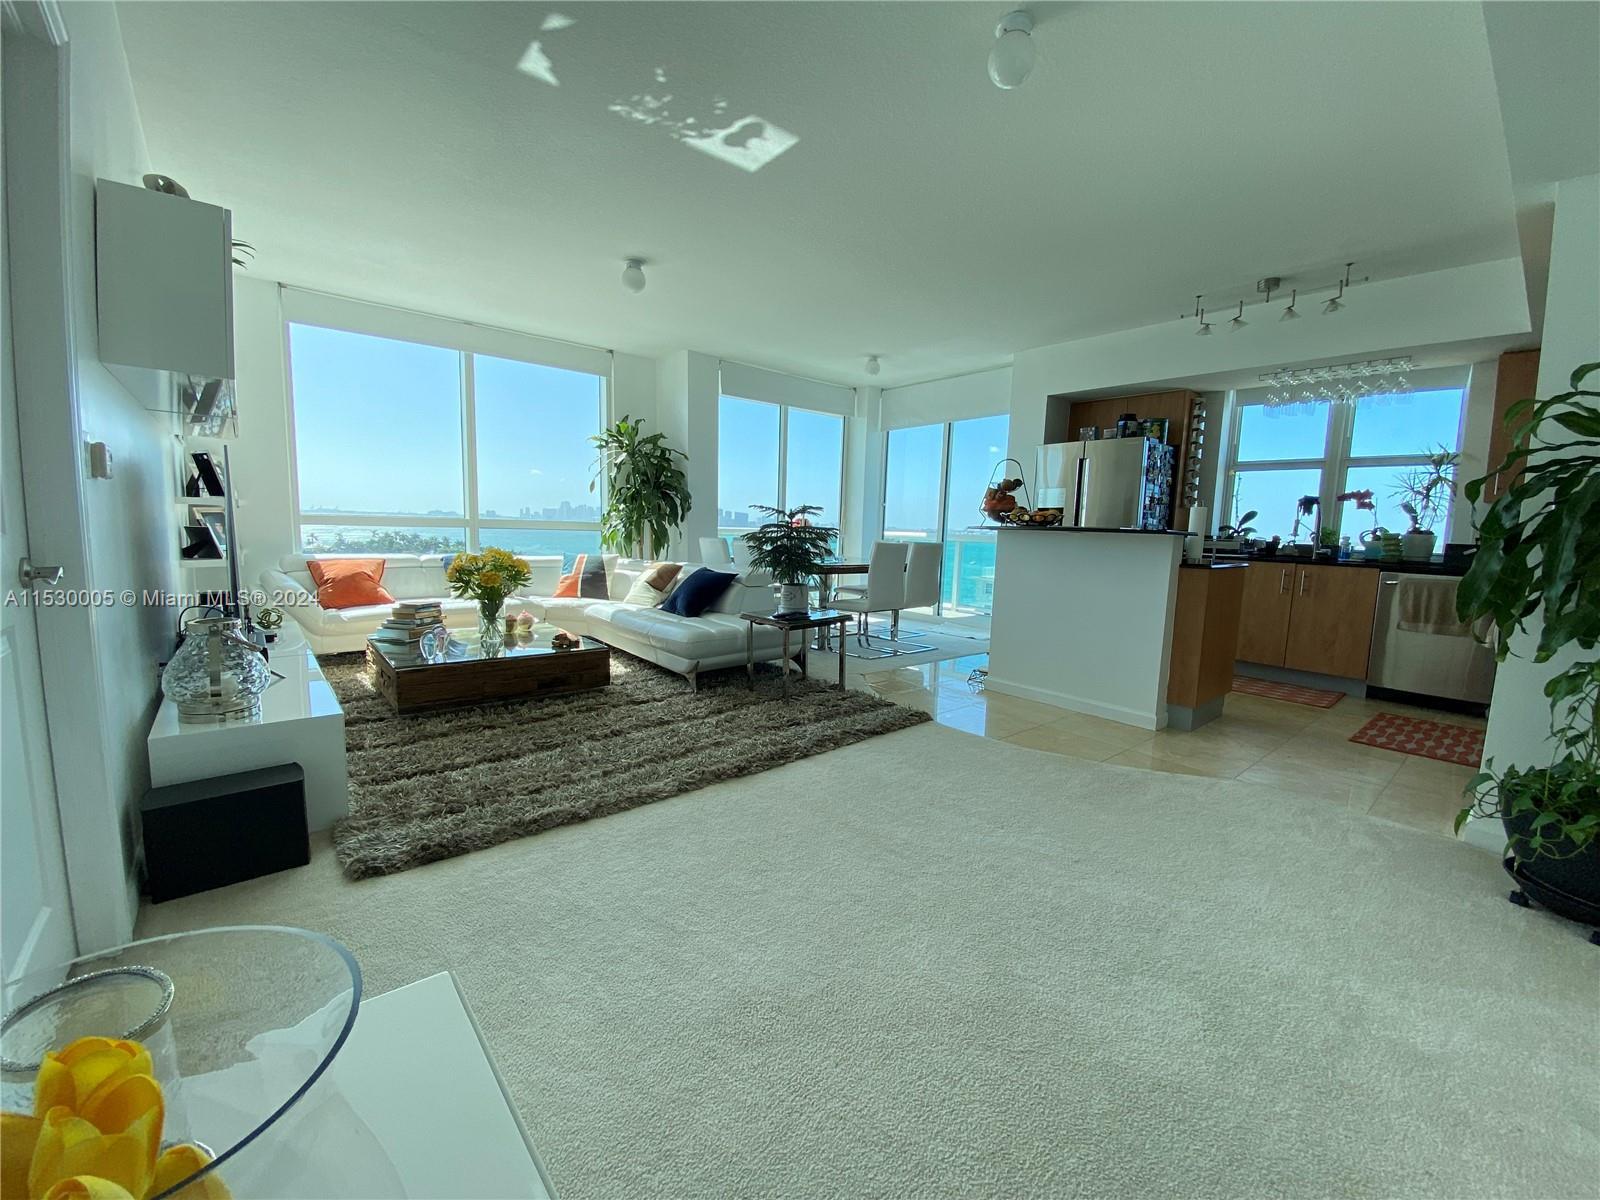 Coastal living in this 2-bedroom condo with a large enclosed Den, 2 bathrooms, and breathtaking view